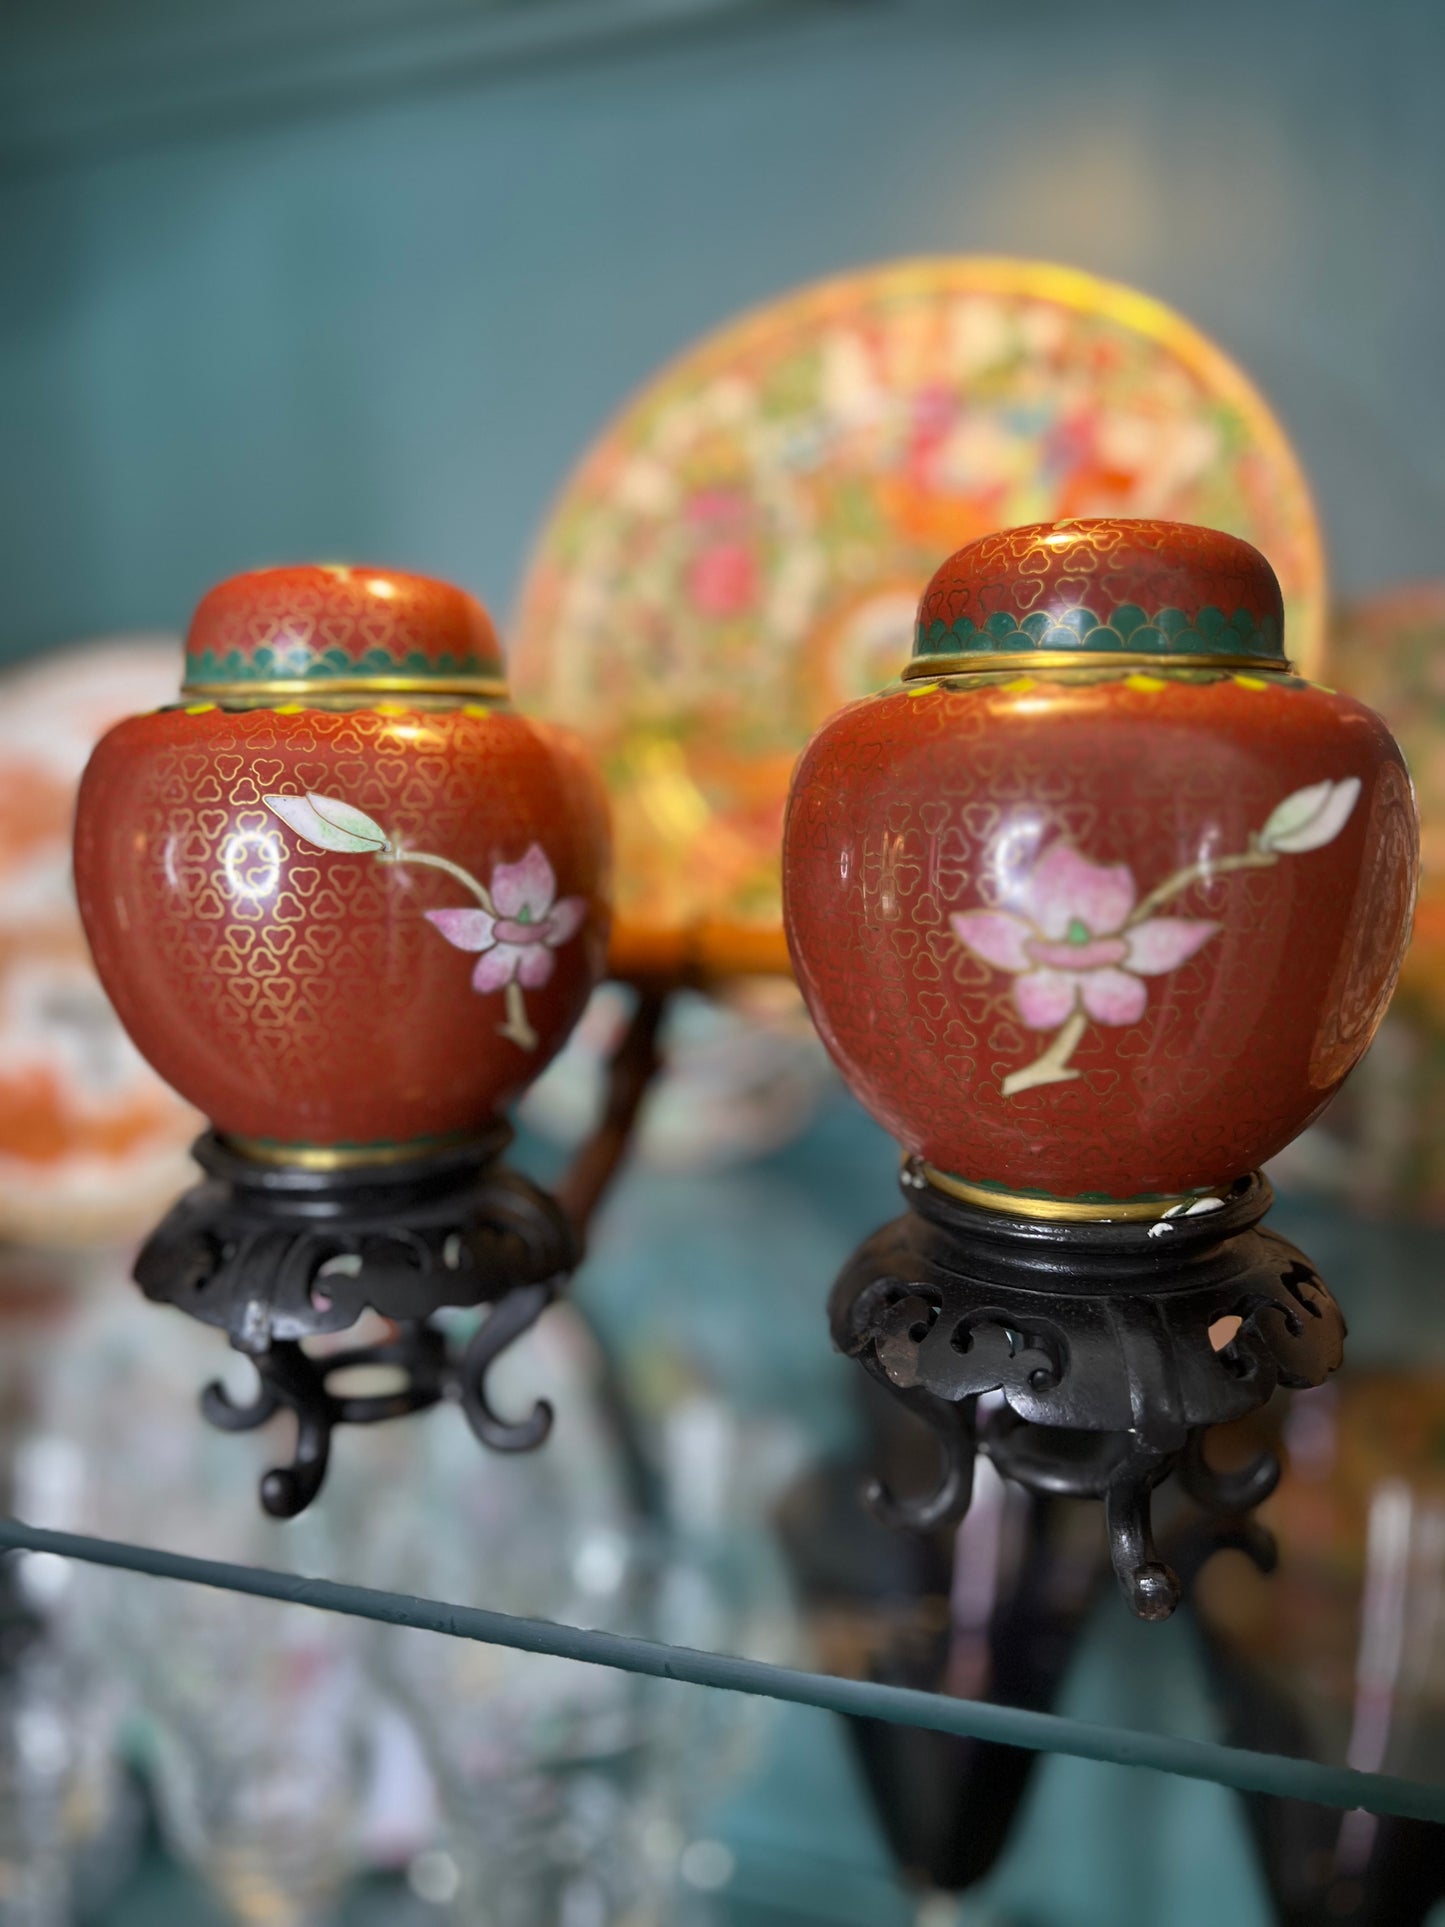 Vintage Pair of Rust Colored Peony Cloisonné Jars on Wood Stands